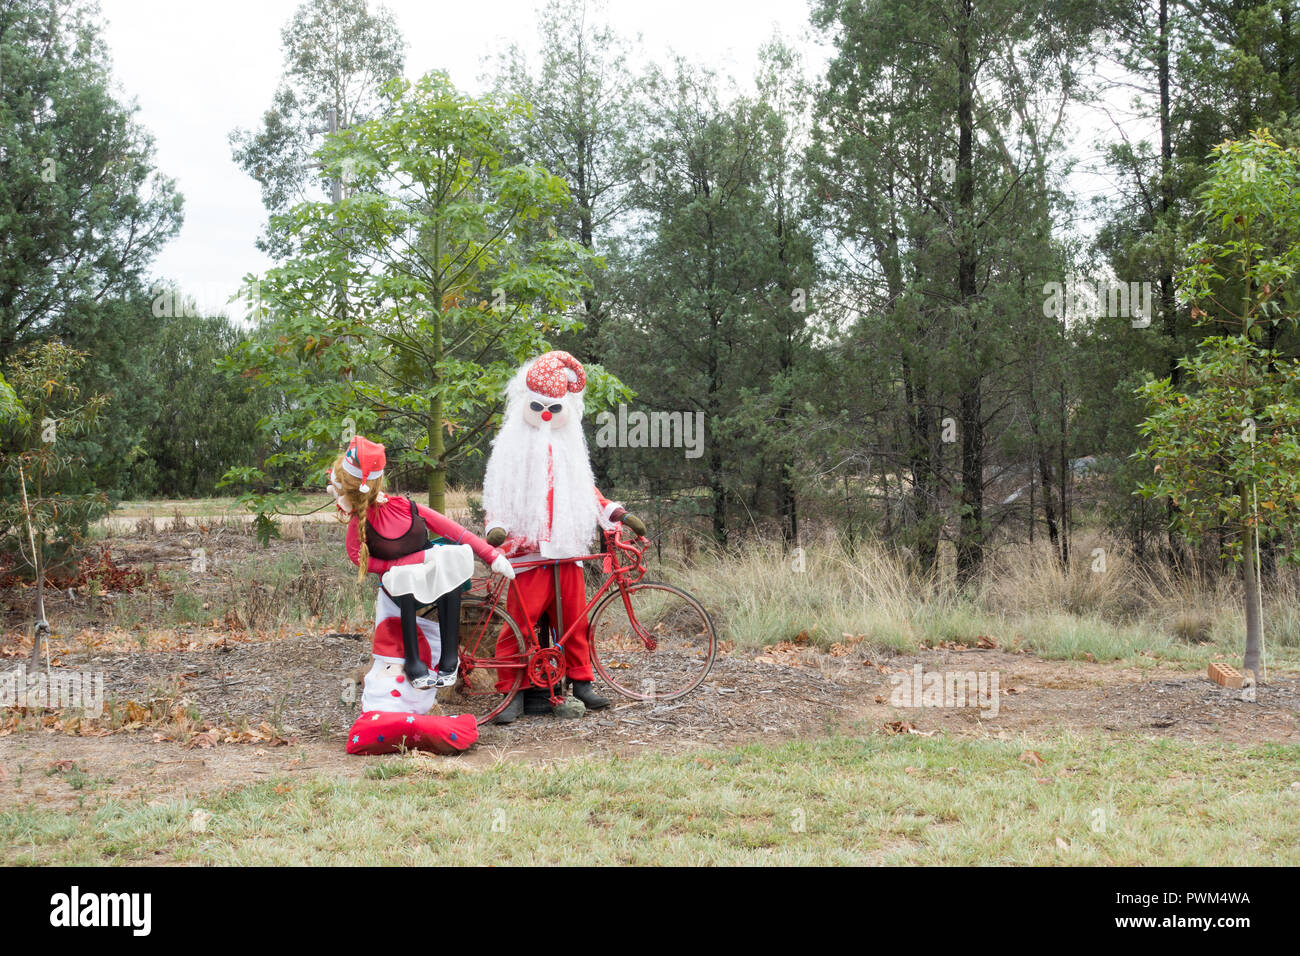 Santa Clause Christmas decoration at front of a rural property in NSW Australia. Stock Photo